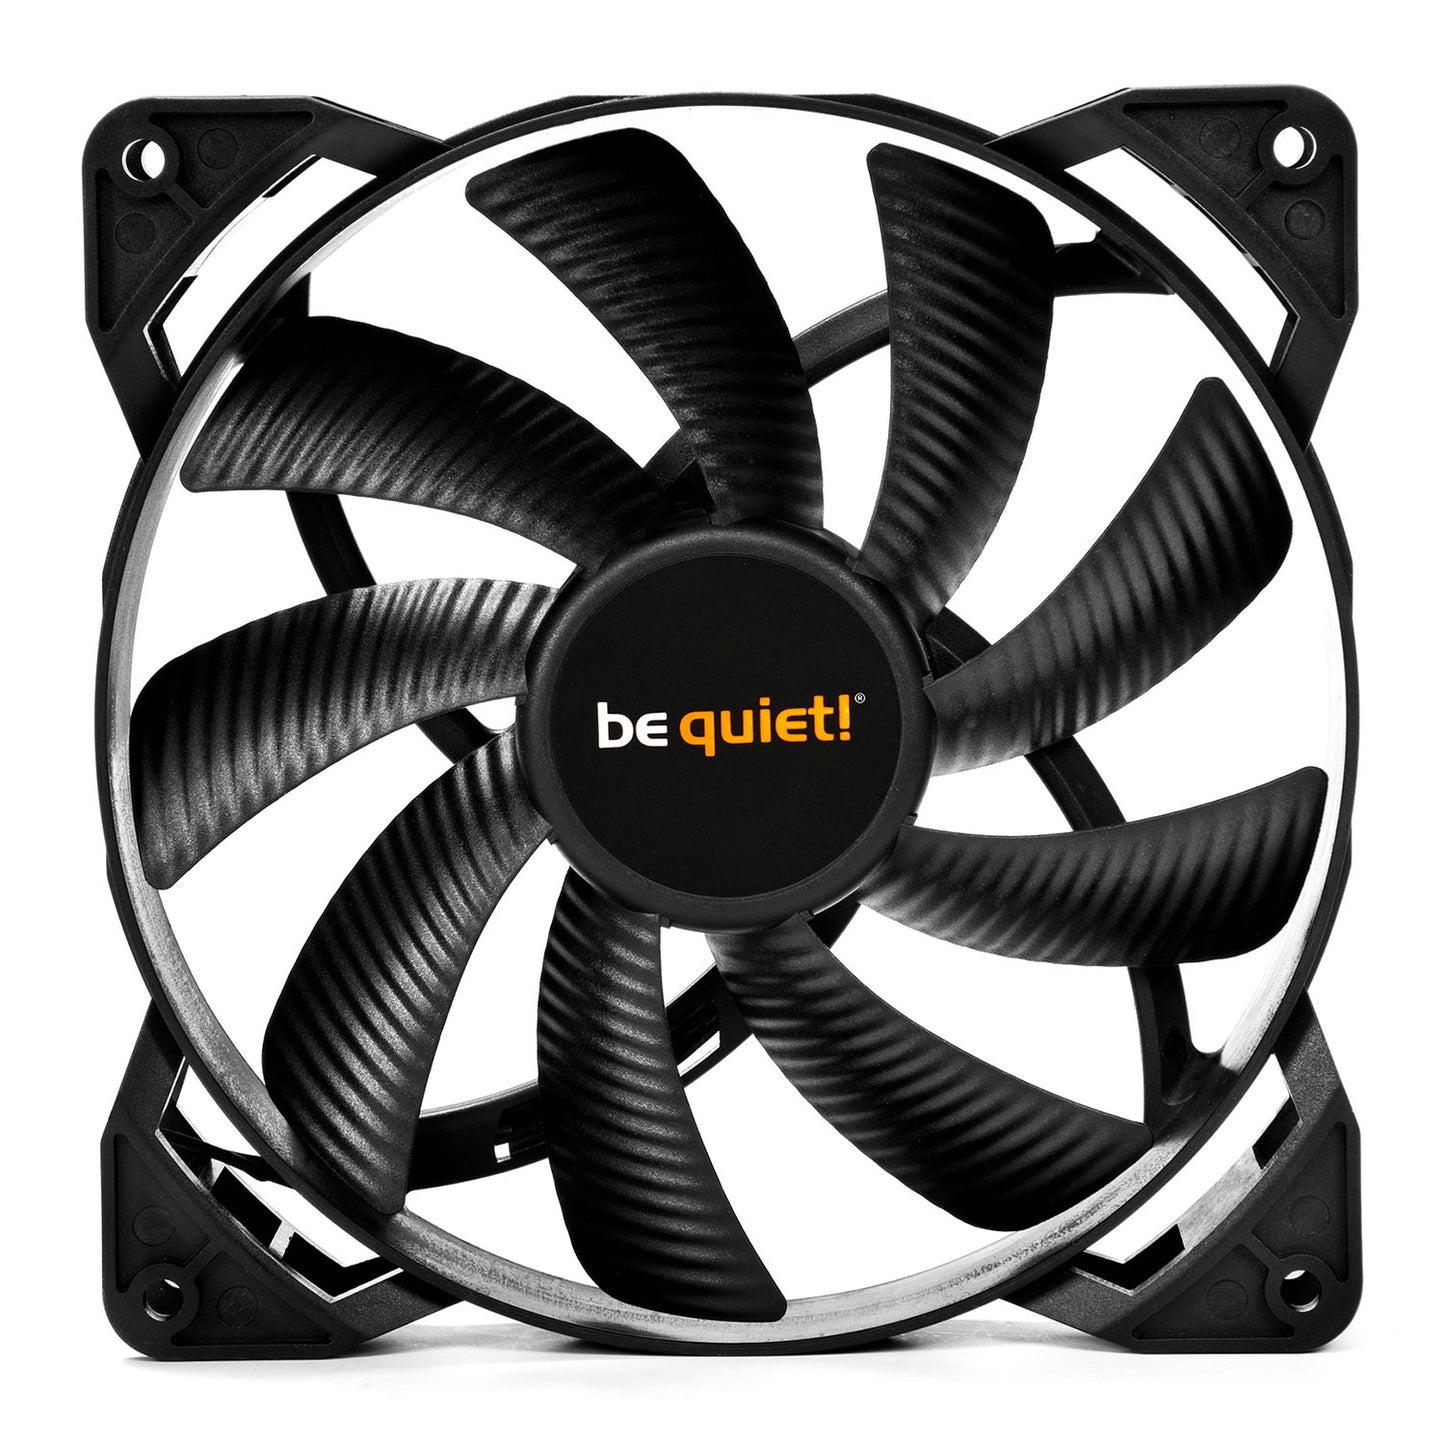 be quiet! Pure Wings 2 140mm High Speed PWM Black Case Fan High Speed, 9 Blade, Up to 1600RPM